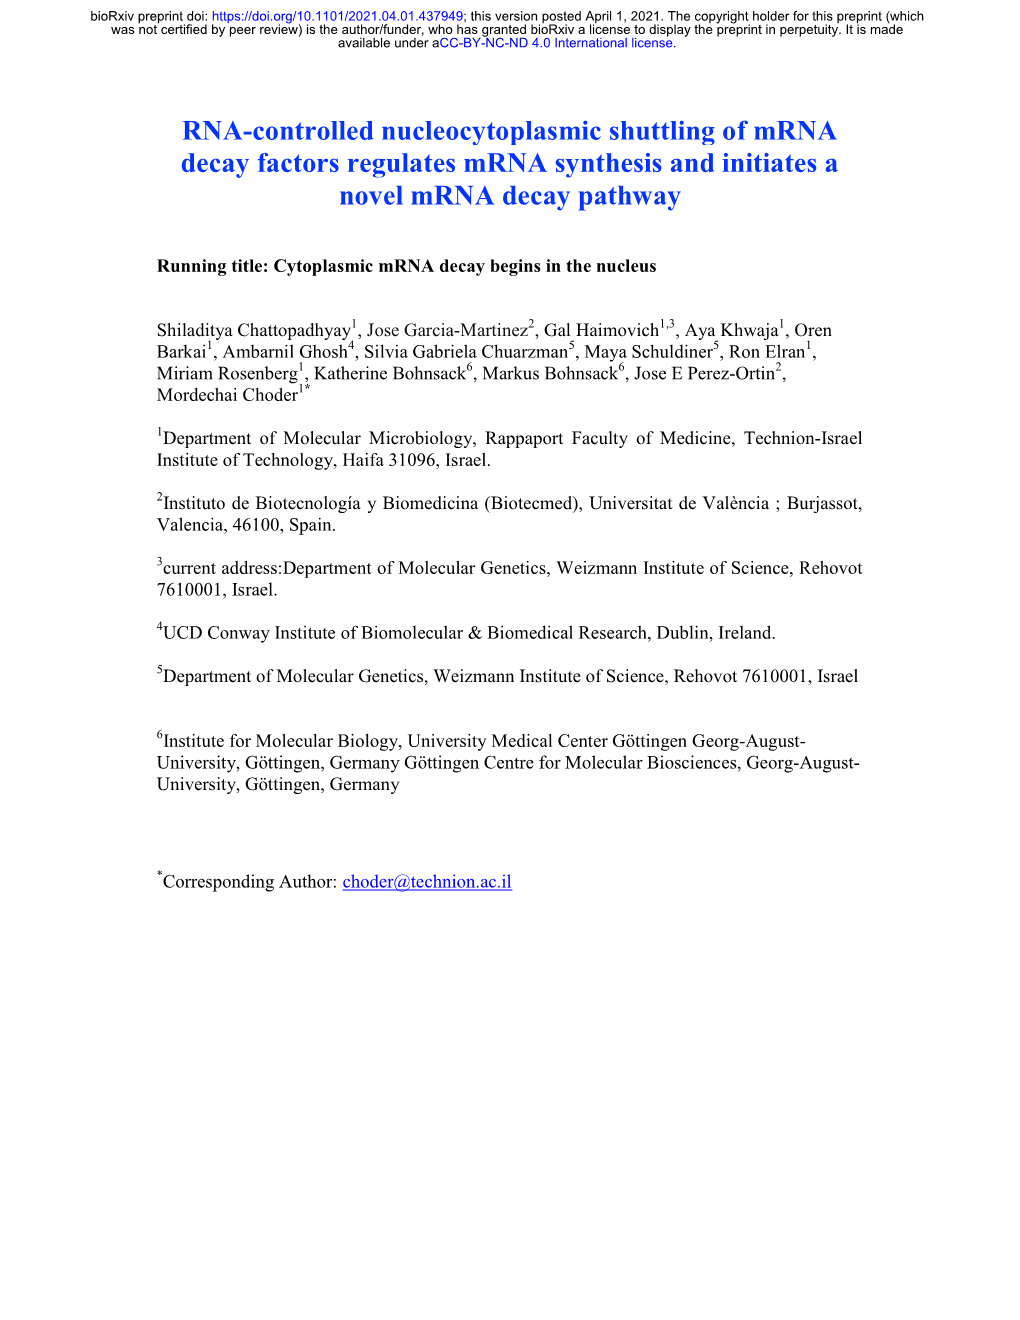 Xrn1 - a Major Mrna Synthesis and Decay Factor